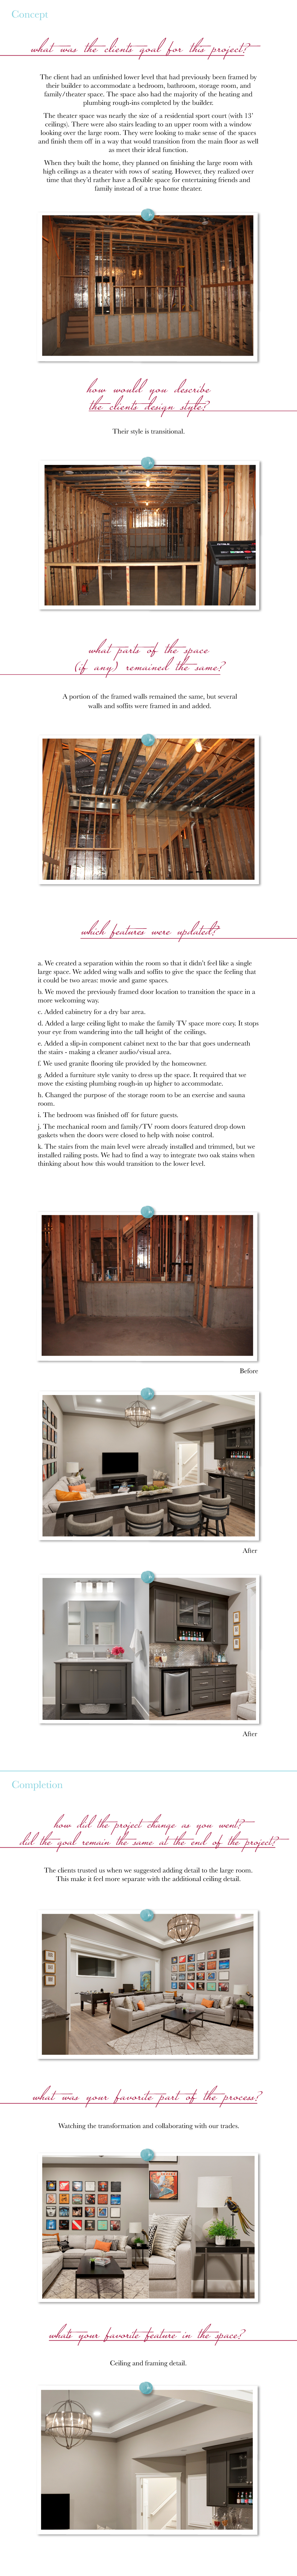 A blog with before and after photos of a lower level finish in The Refined interior design project.